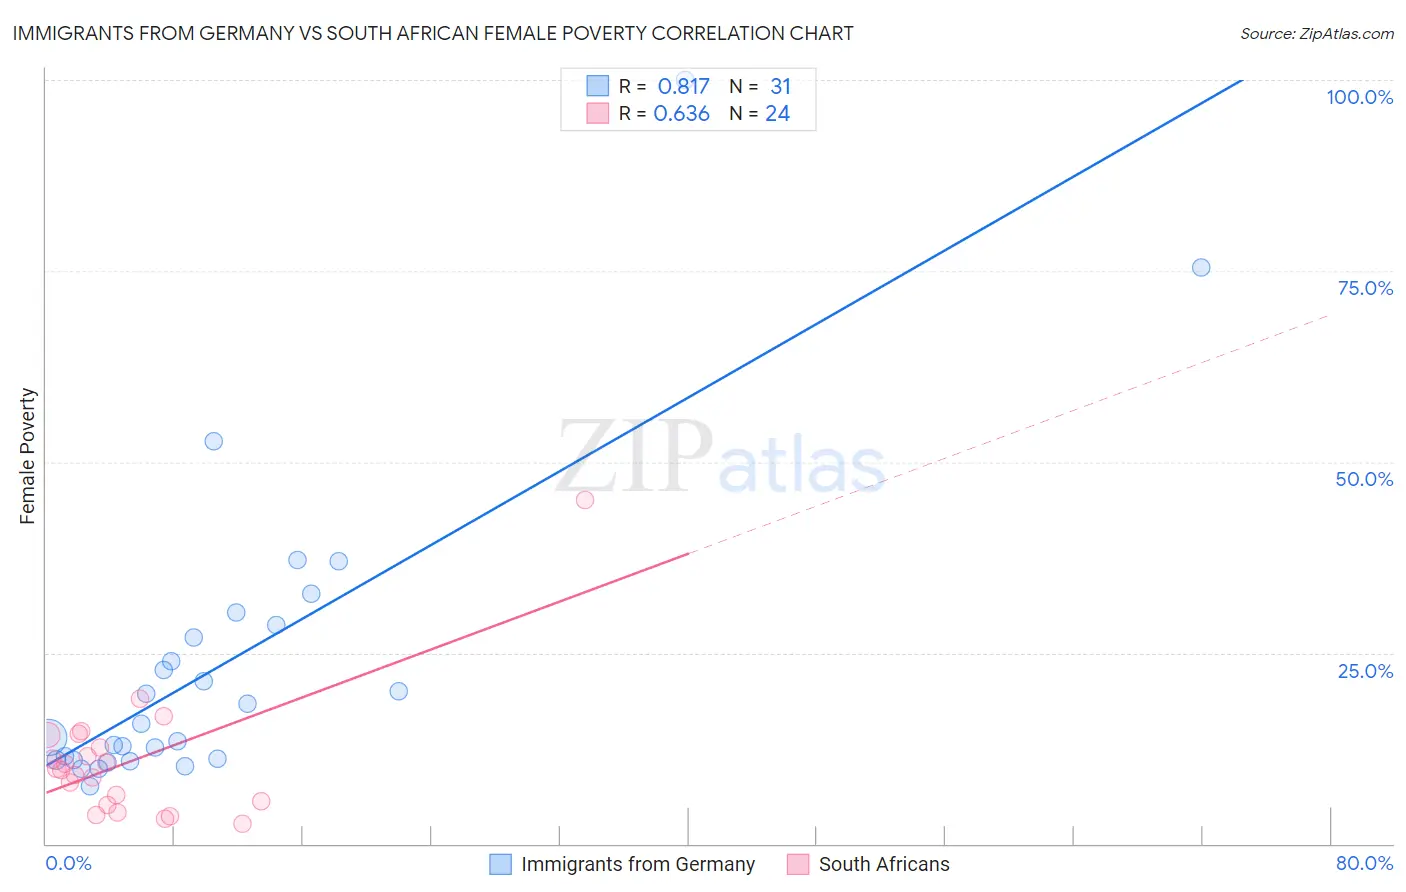 Immigrants from Germany vs South African Female Poverty